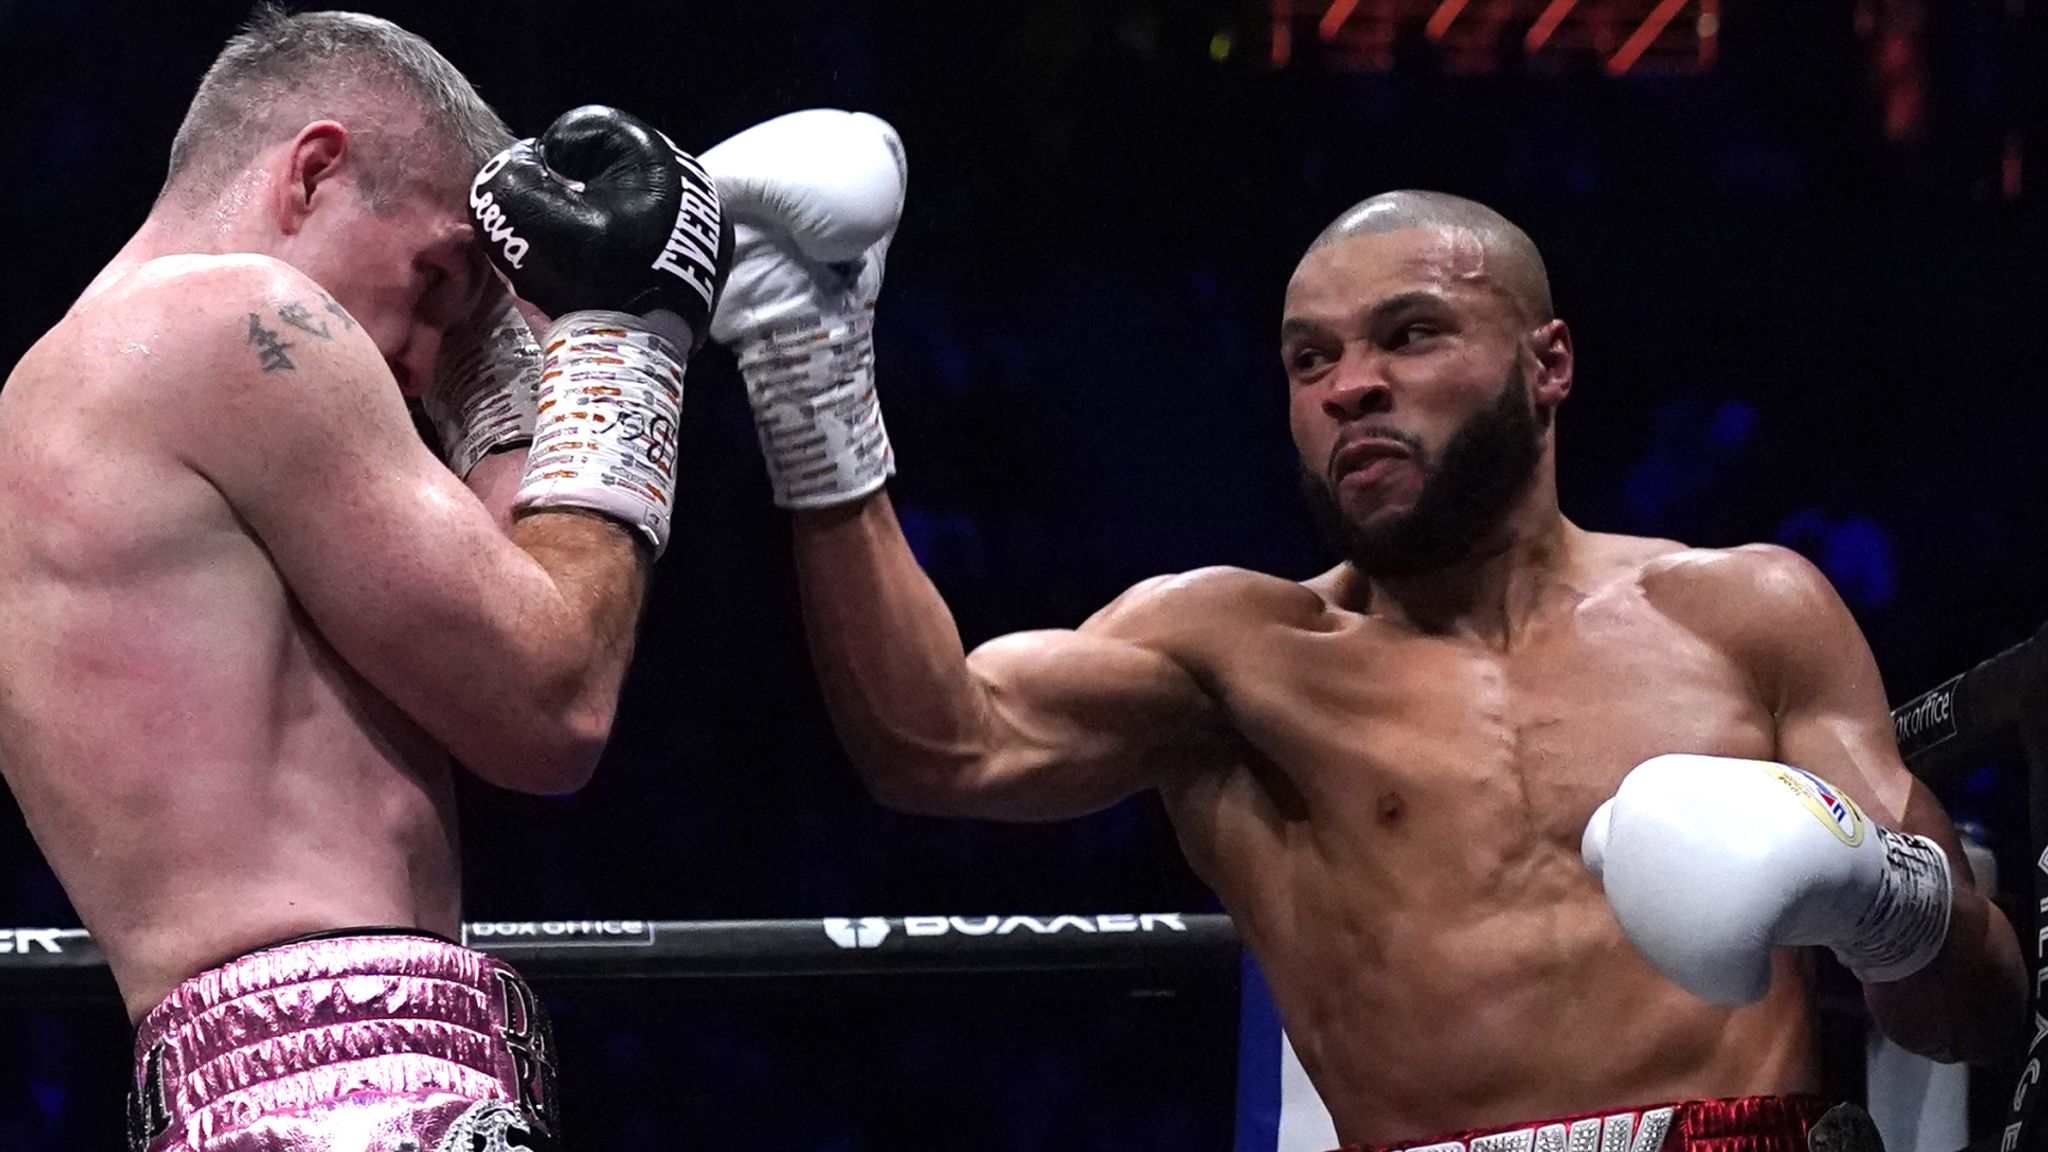 Chris Eubank Jr faces boxing exile if he loses to Liam Smith